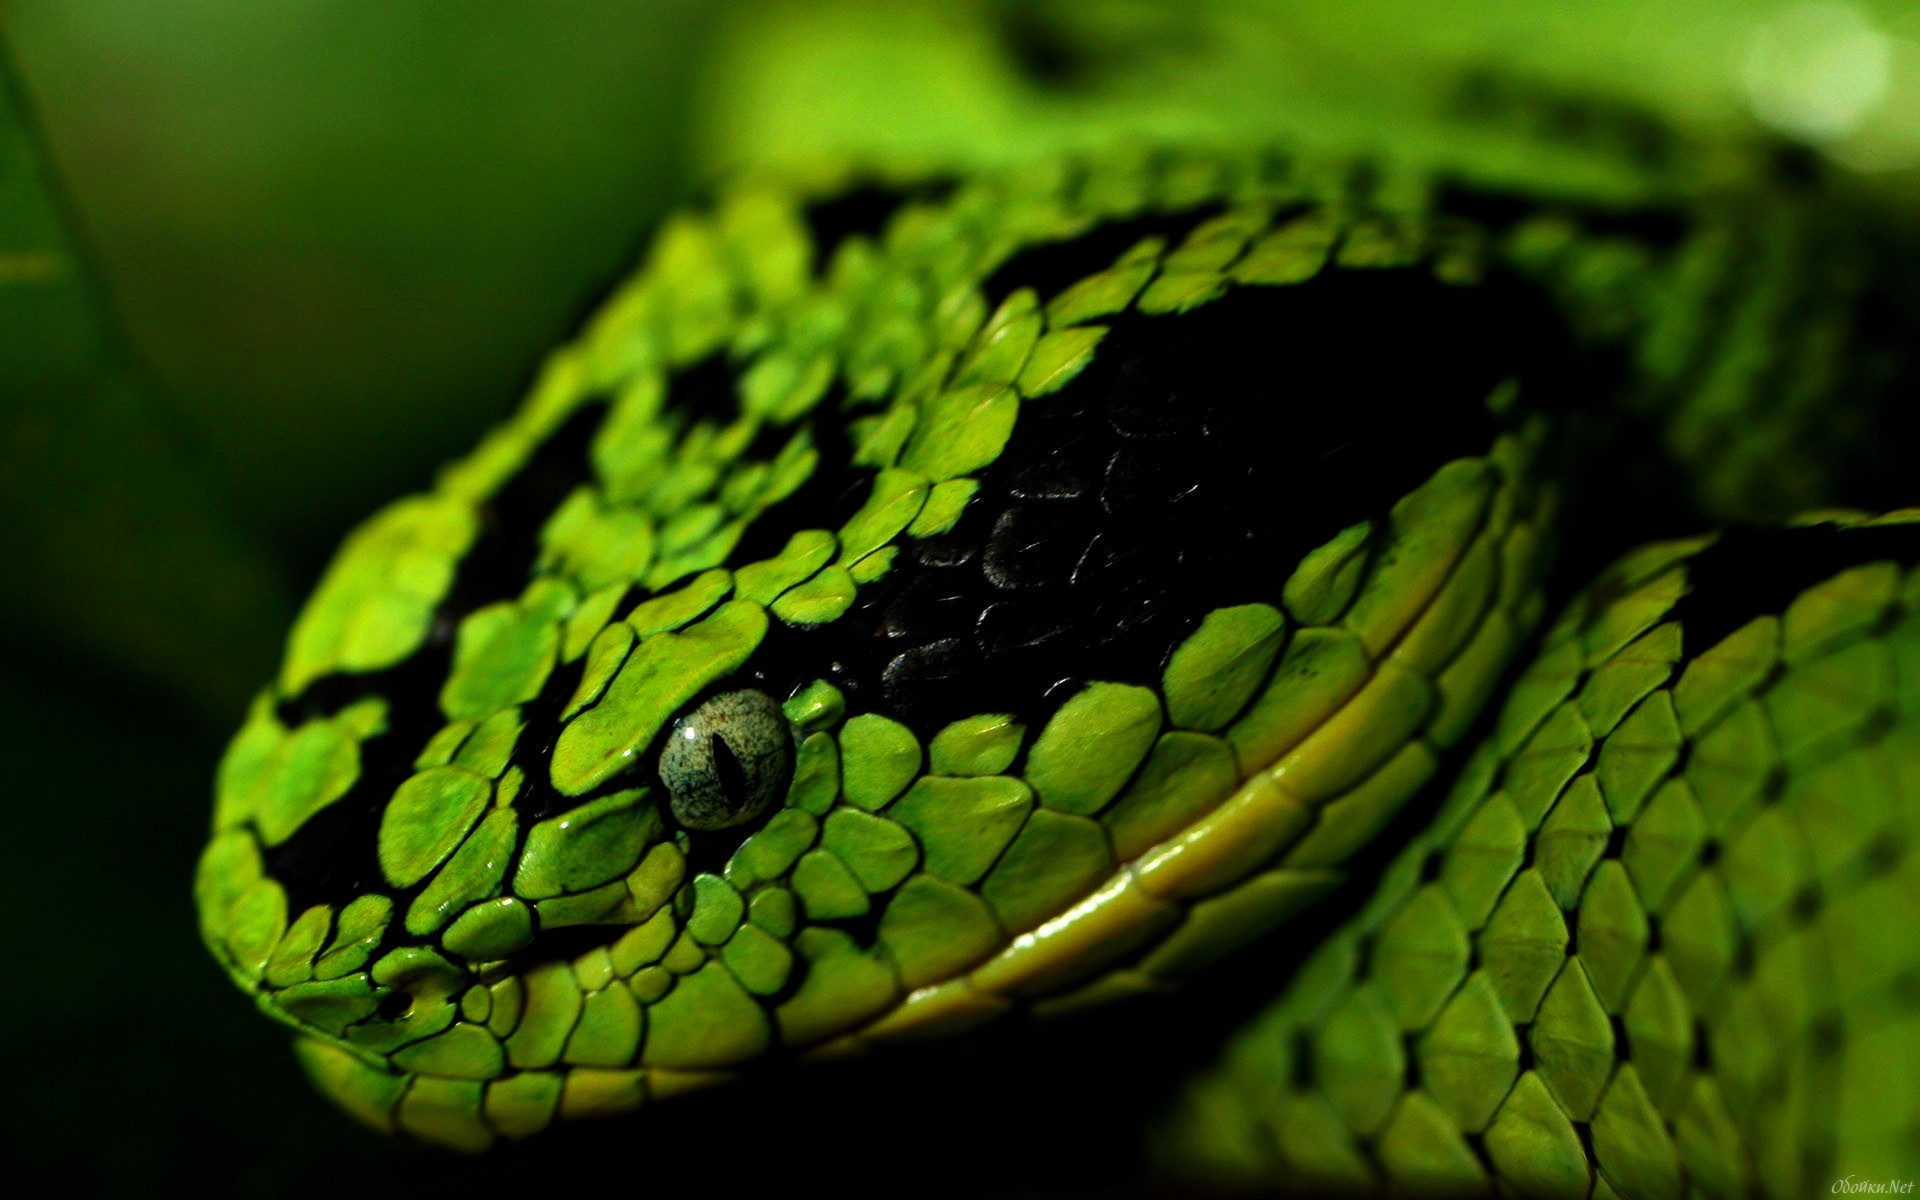  Reptiles Windows Backgrounds